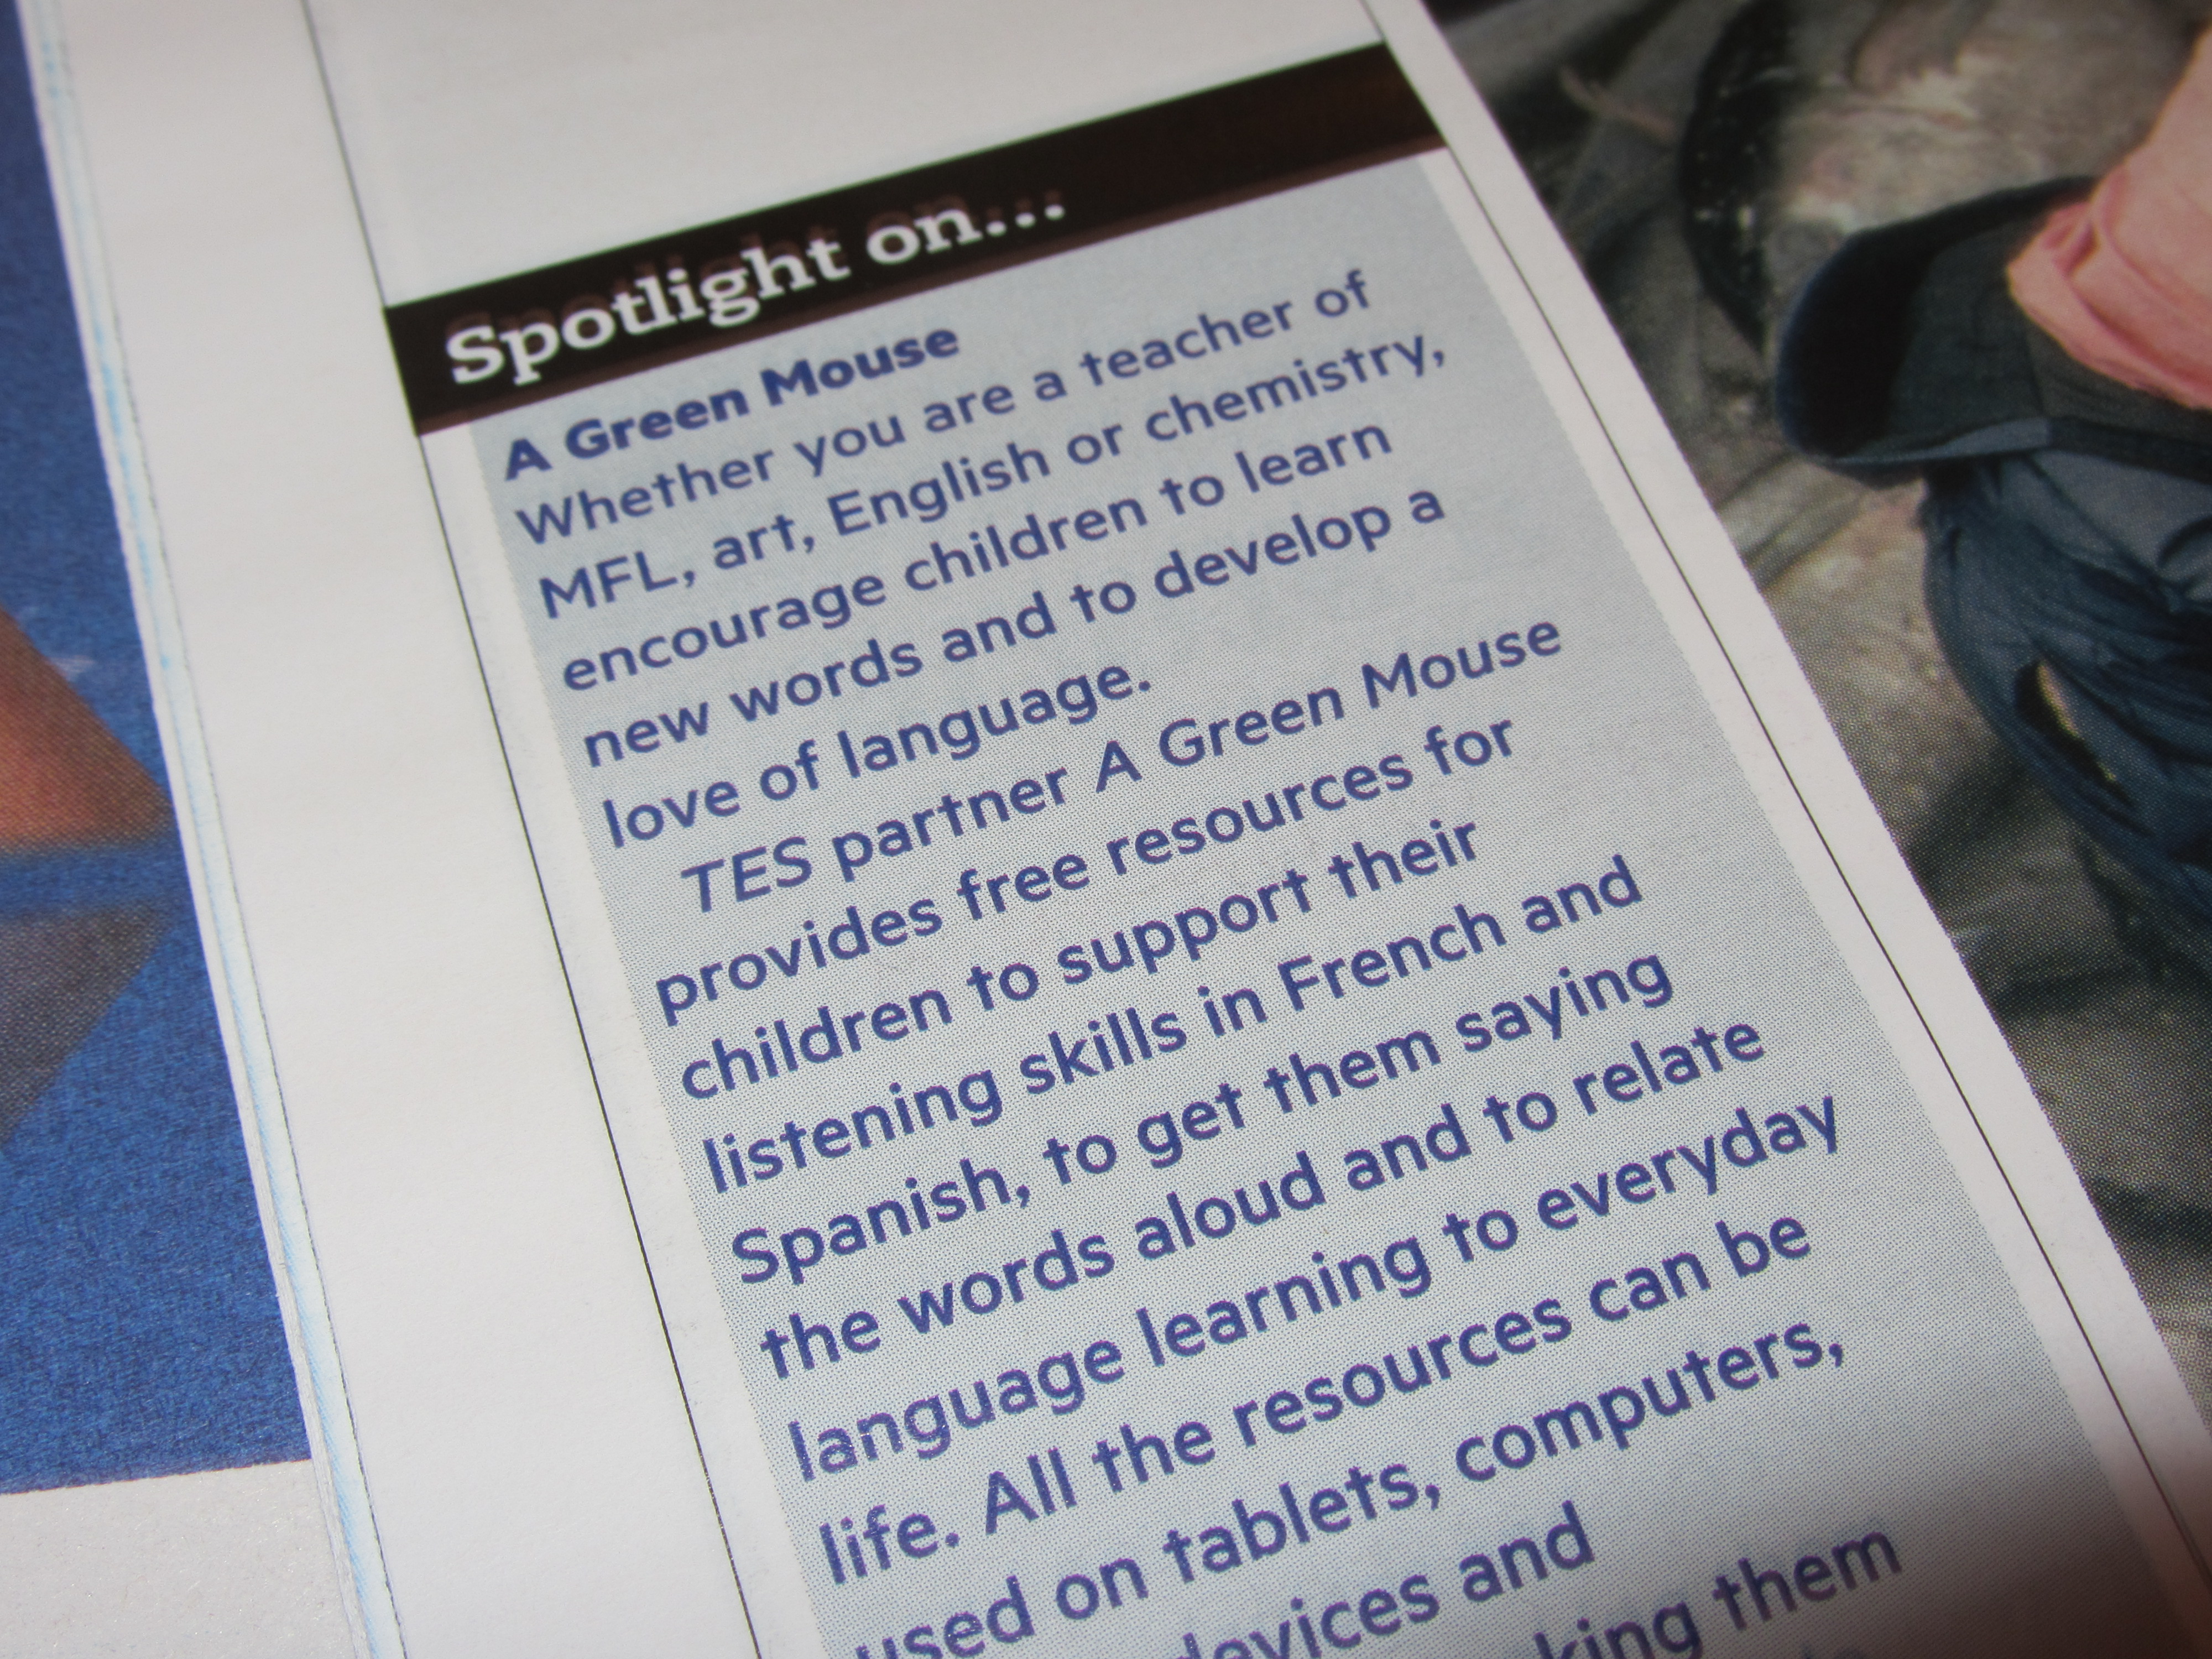 image of A Green Mouse article in the Times Educational Supplement